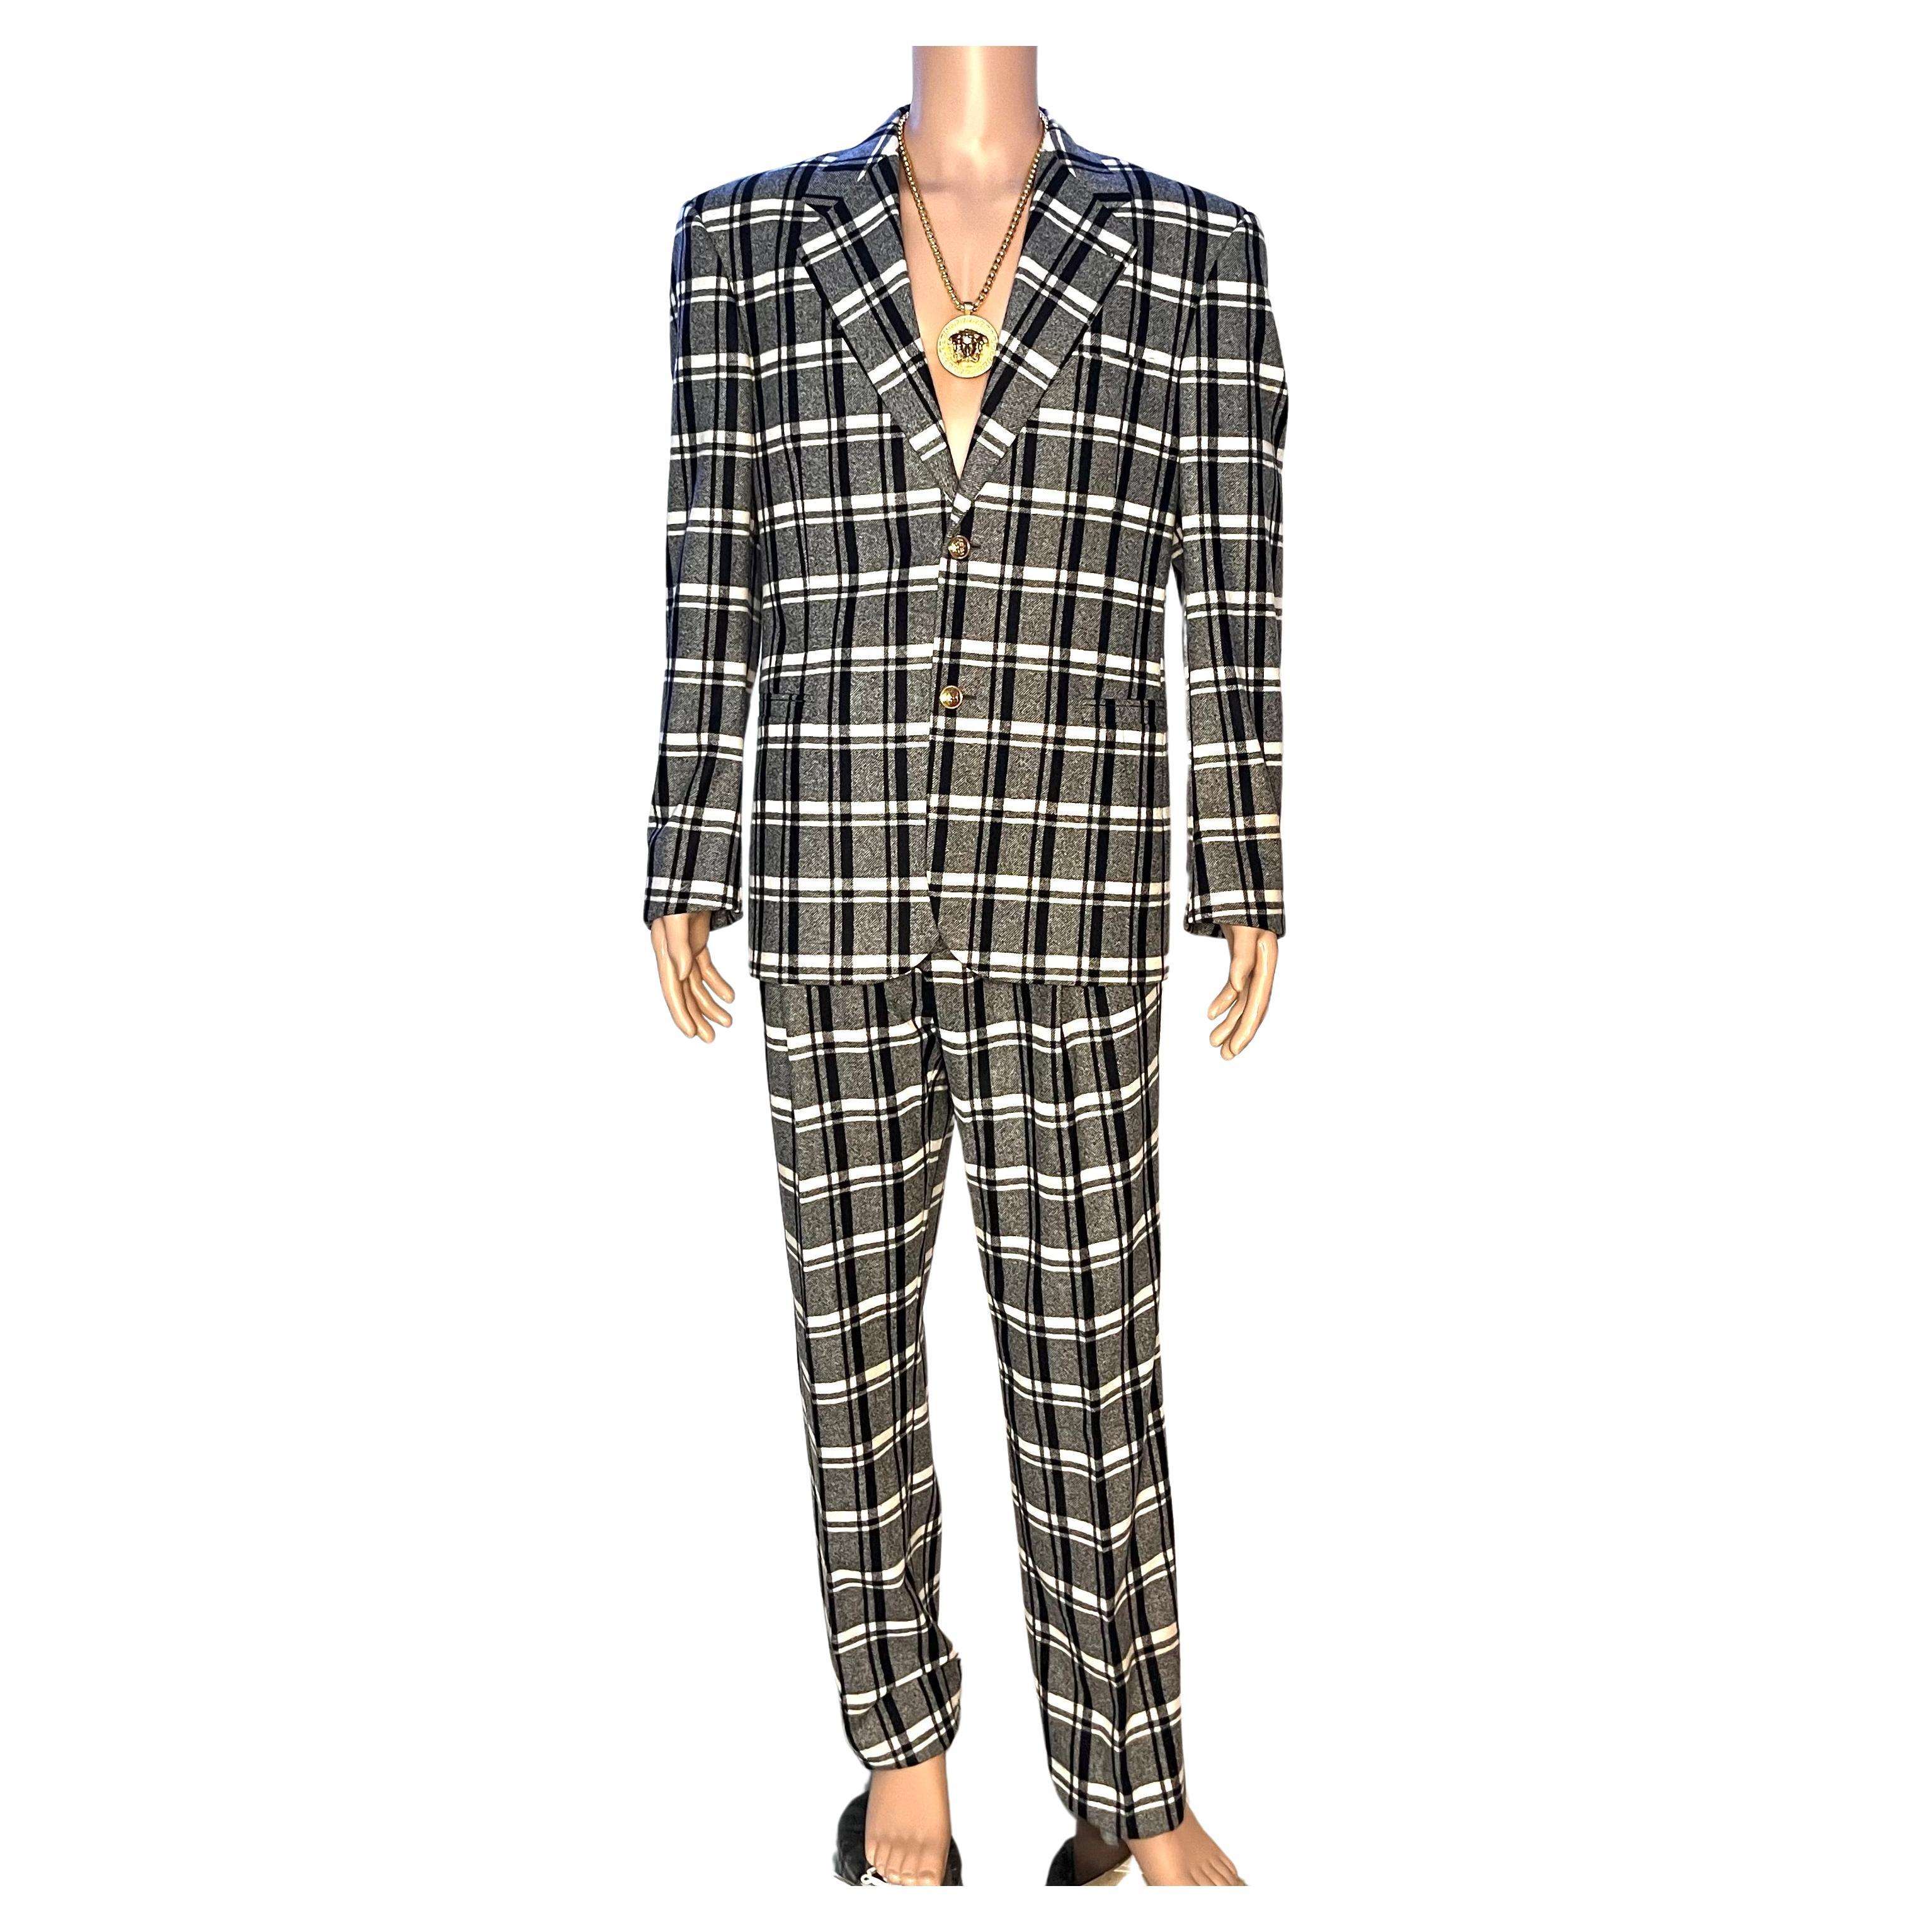 F/W2013 look #2 BRAND NEW VERSACE CHECKERED 100% WOOL SUIT 50 - 40 (L) For Sale